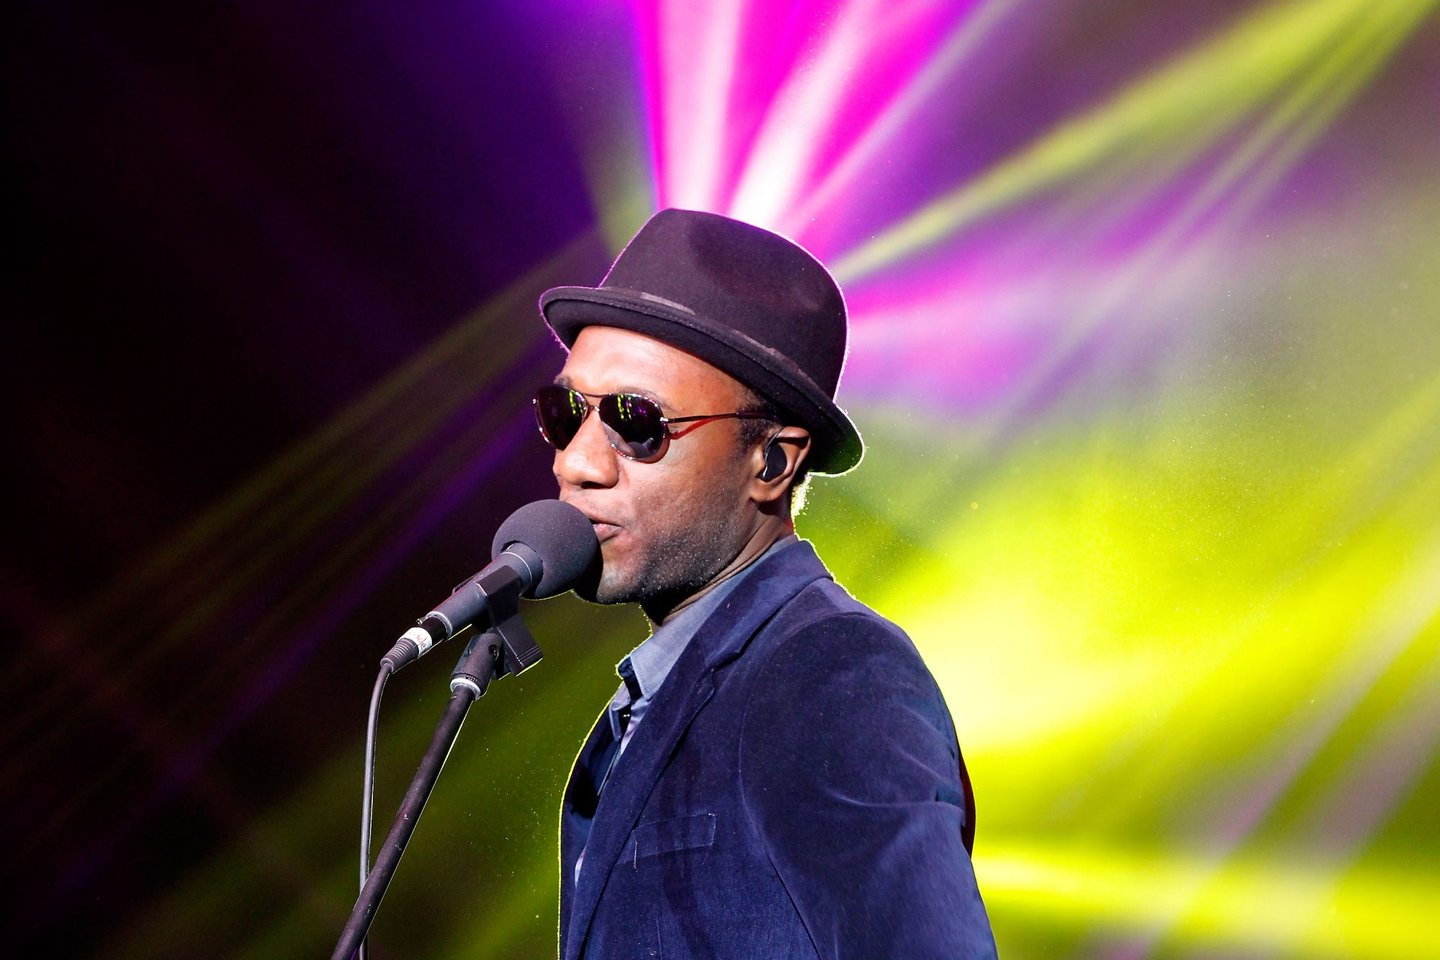 BEIJING, CHINA - APRIL 22: Singer Aloe Blacc performs during the exclusive 'For the Love of Cinema' event hosted by Swiss watch manufacturer IWC Schaffhausen in the role as new sponsor of the Beijing International Film Festival, at the Ming Dynasty City Wall on April 22, 2013 in Beijing, China. (Photo by Getty Images for IWC)